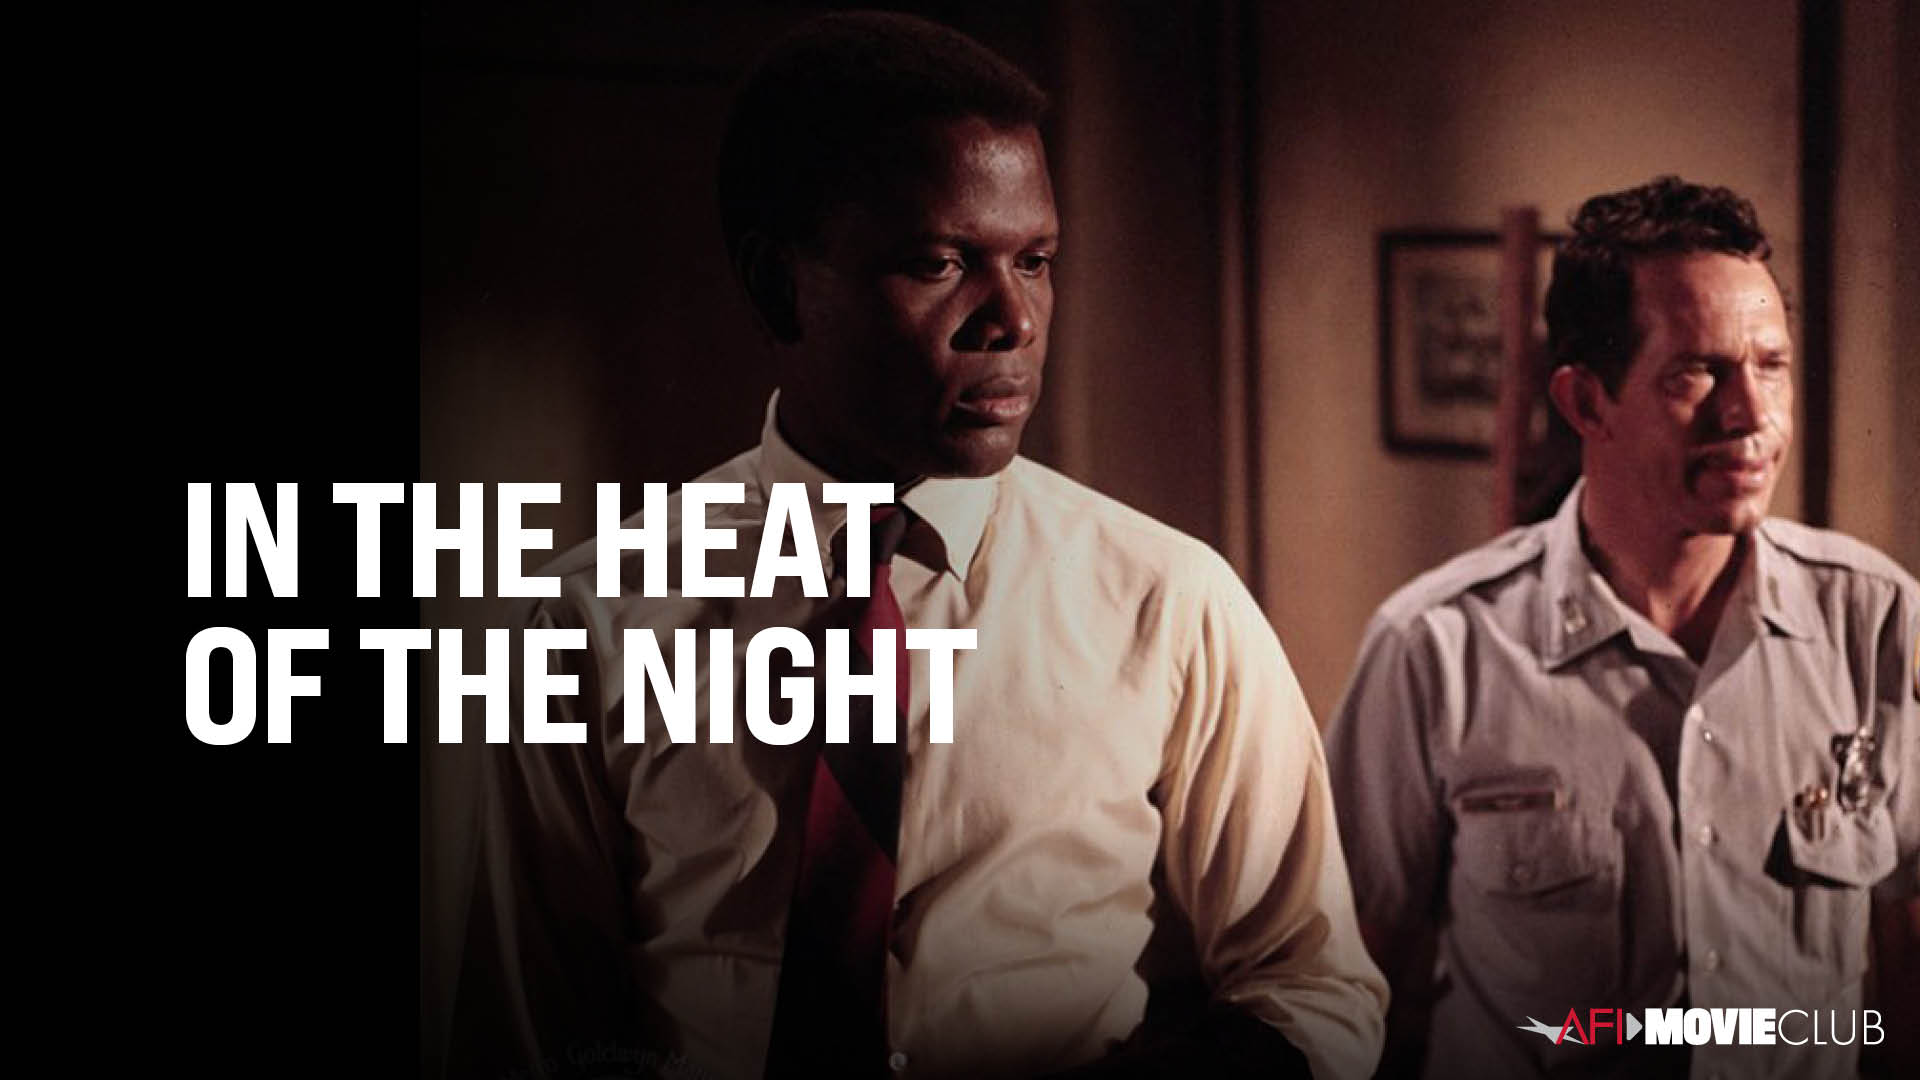 In The Heat of the Night Film Still - Sidney Poitier and Warren Oates